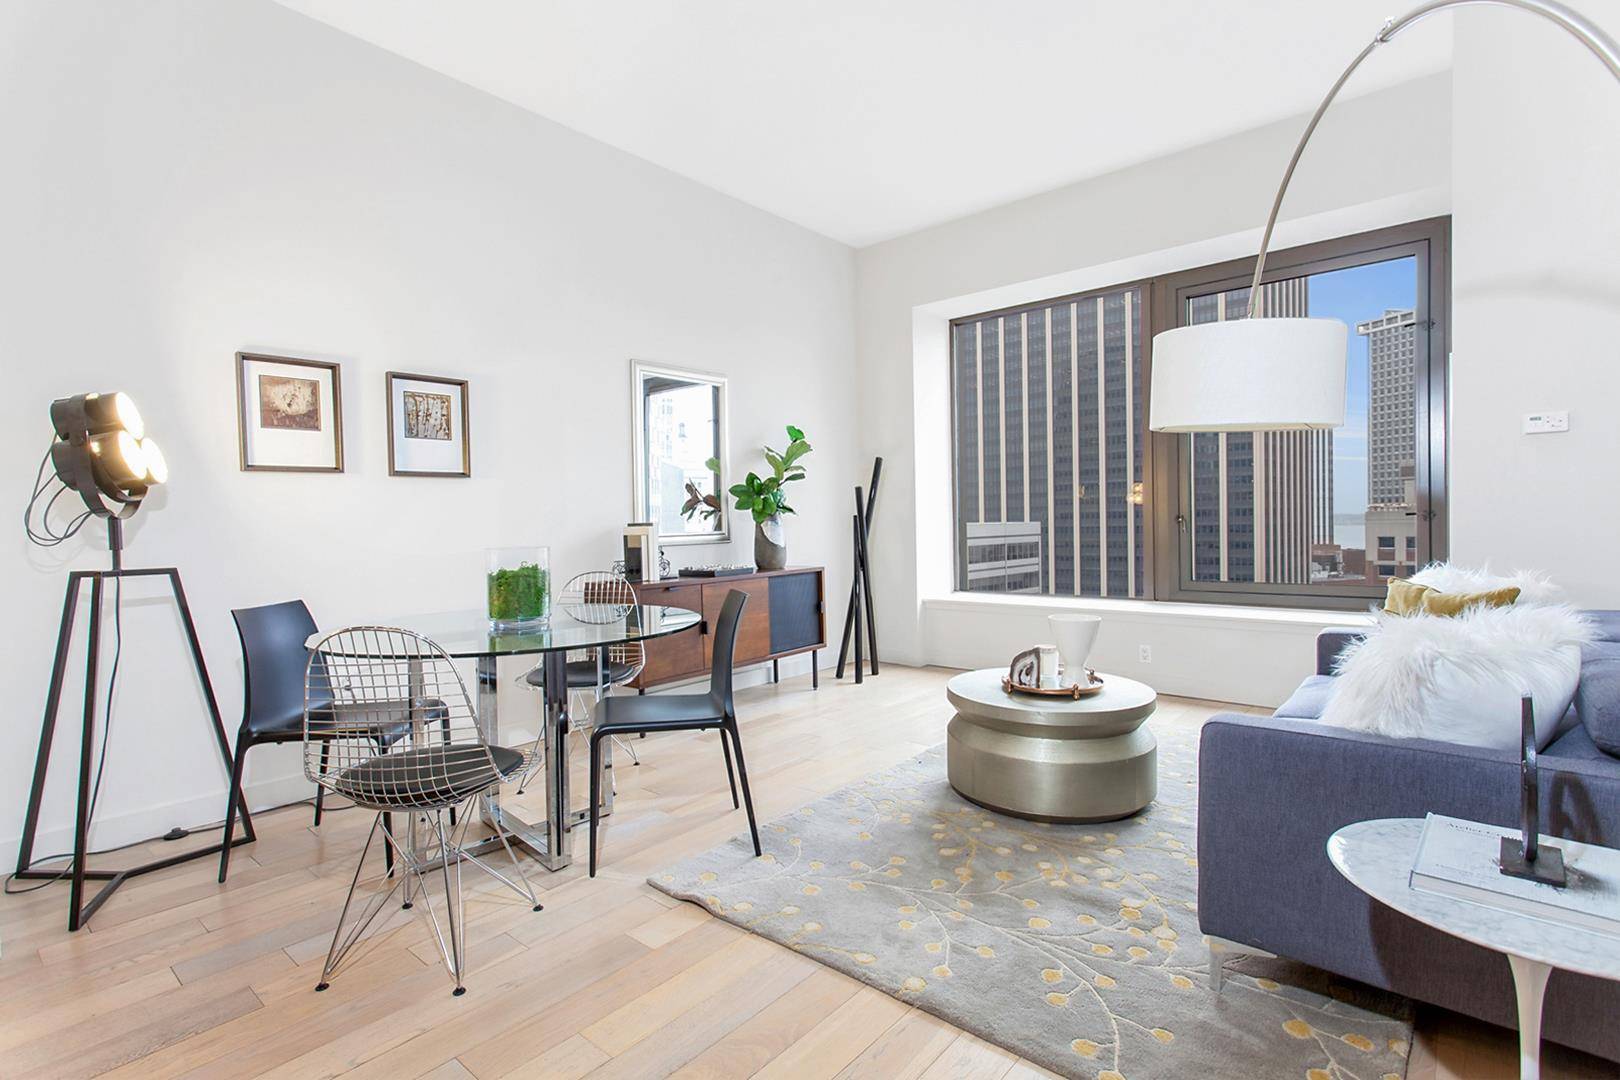 LIMITED TIME OFFER ! Starting immediately and offered until April 30th, 2024 the Platinum Properties team at 75 Wall Street is thrilled to announce an exclusive 4 commission for buyer ...